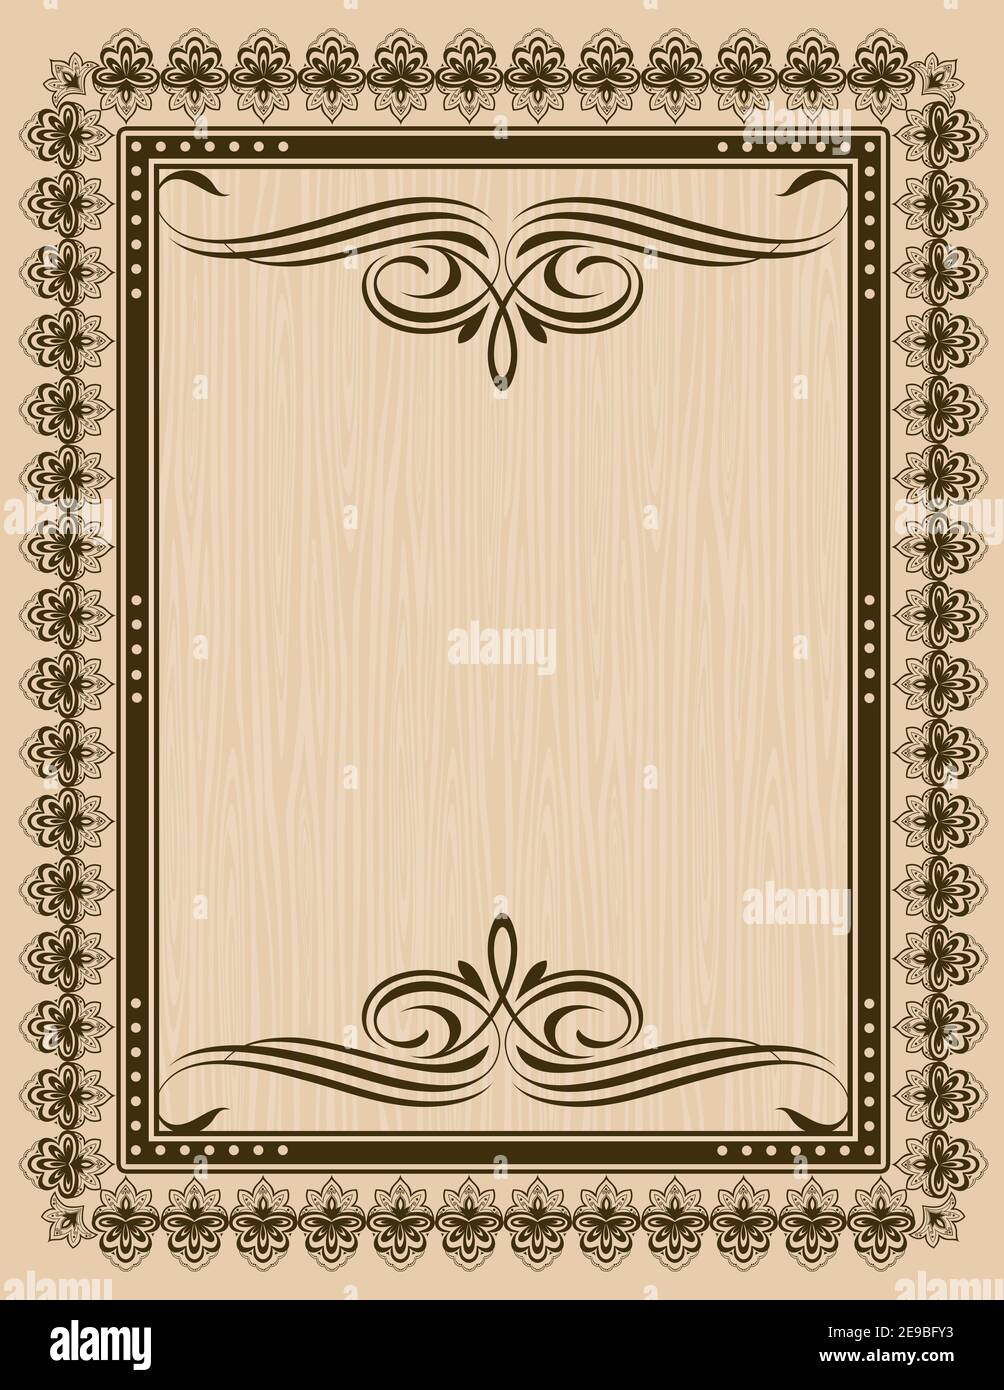 Vintage background with patterns and decorative border. Template for invitation  card design Stock Photo - Alamy